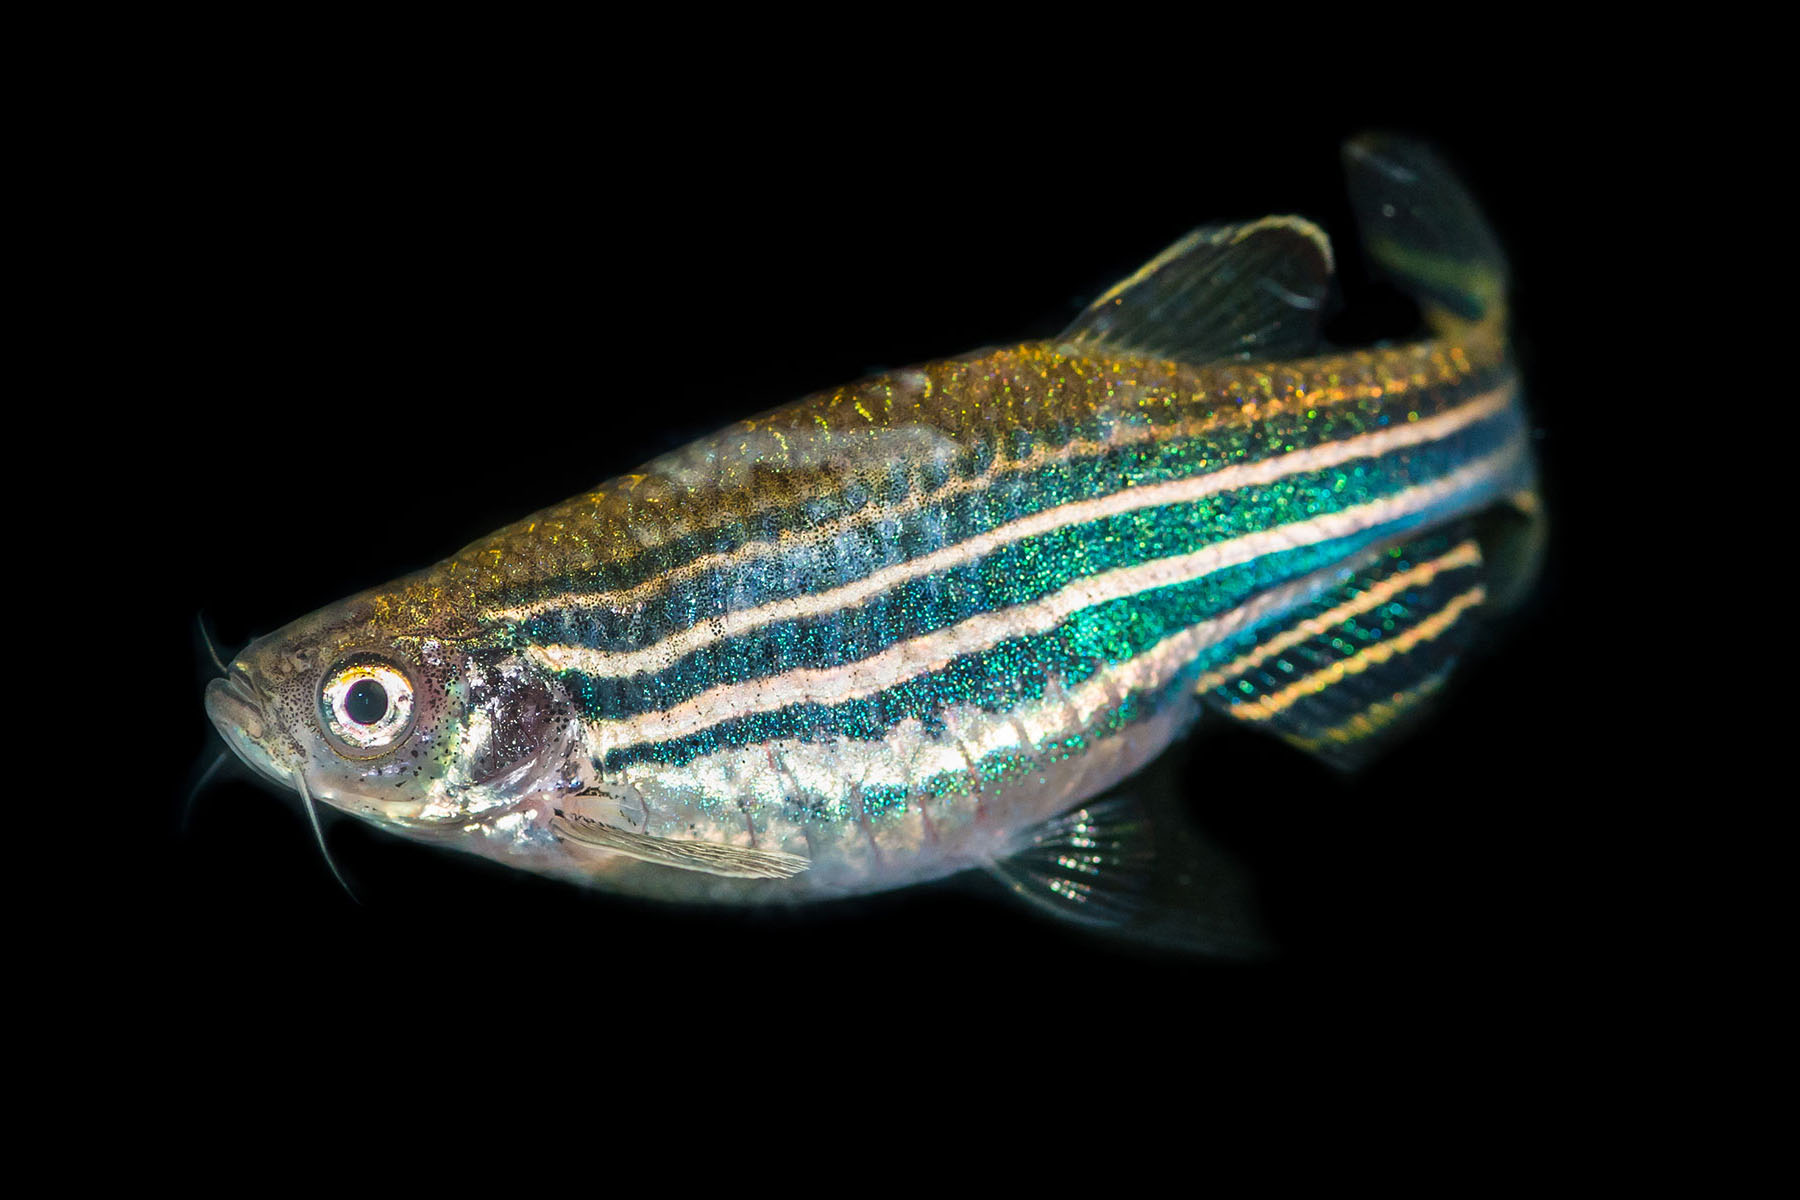 A small zebrafish with blackish stripes along its body of green scales.